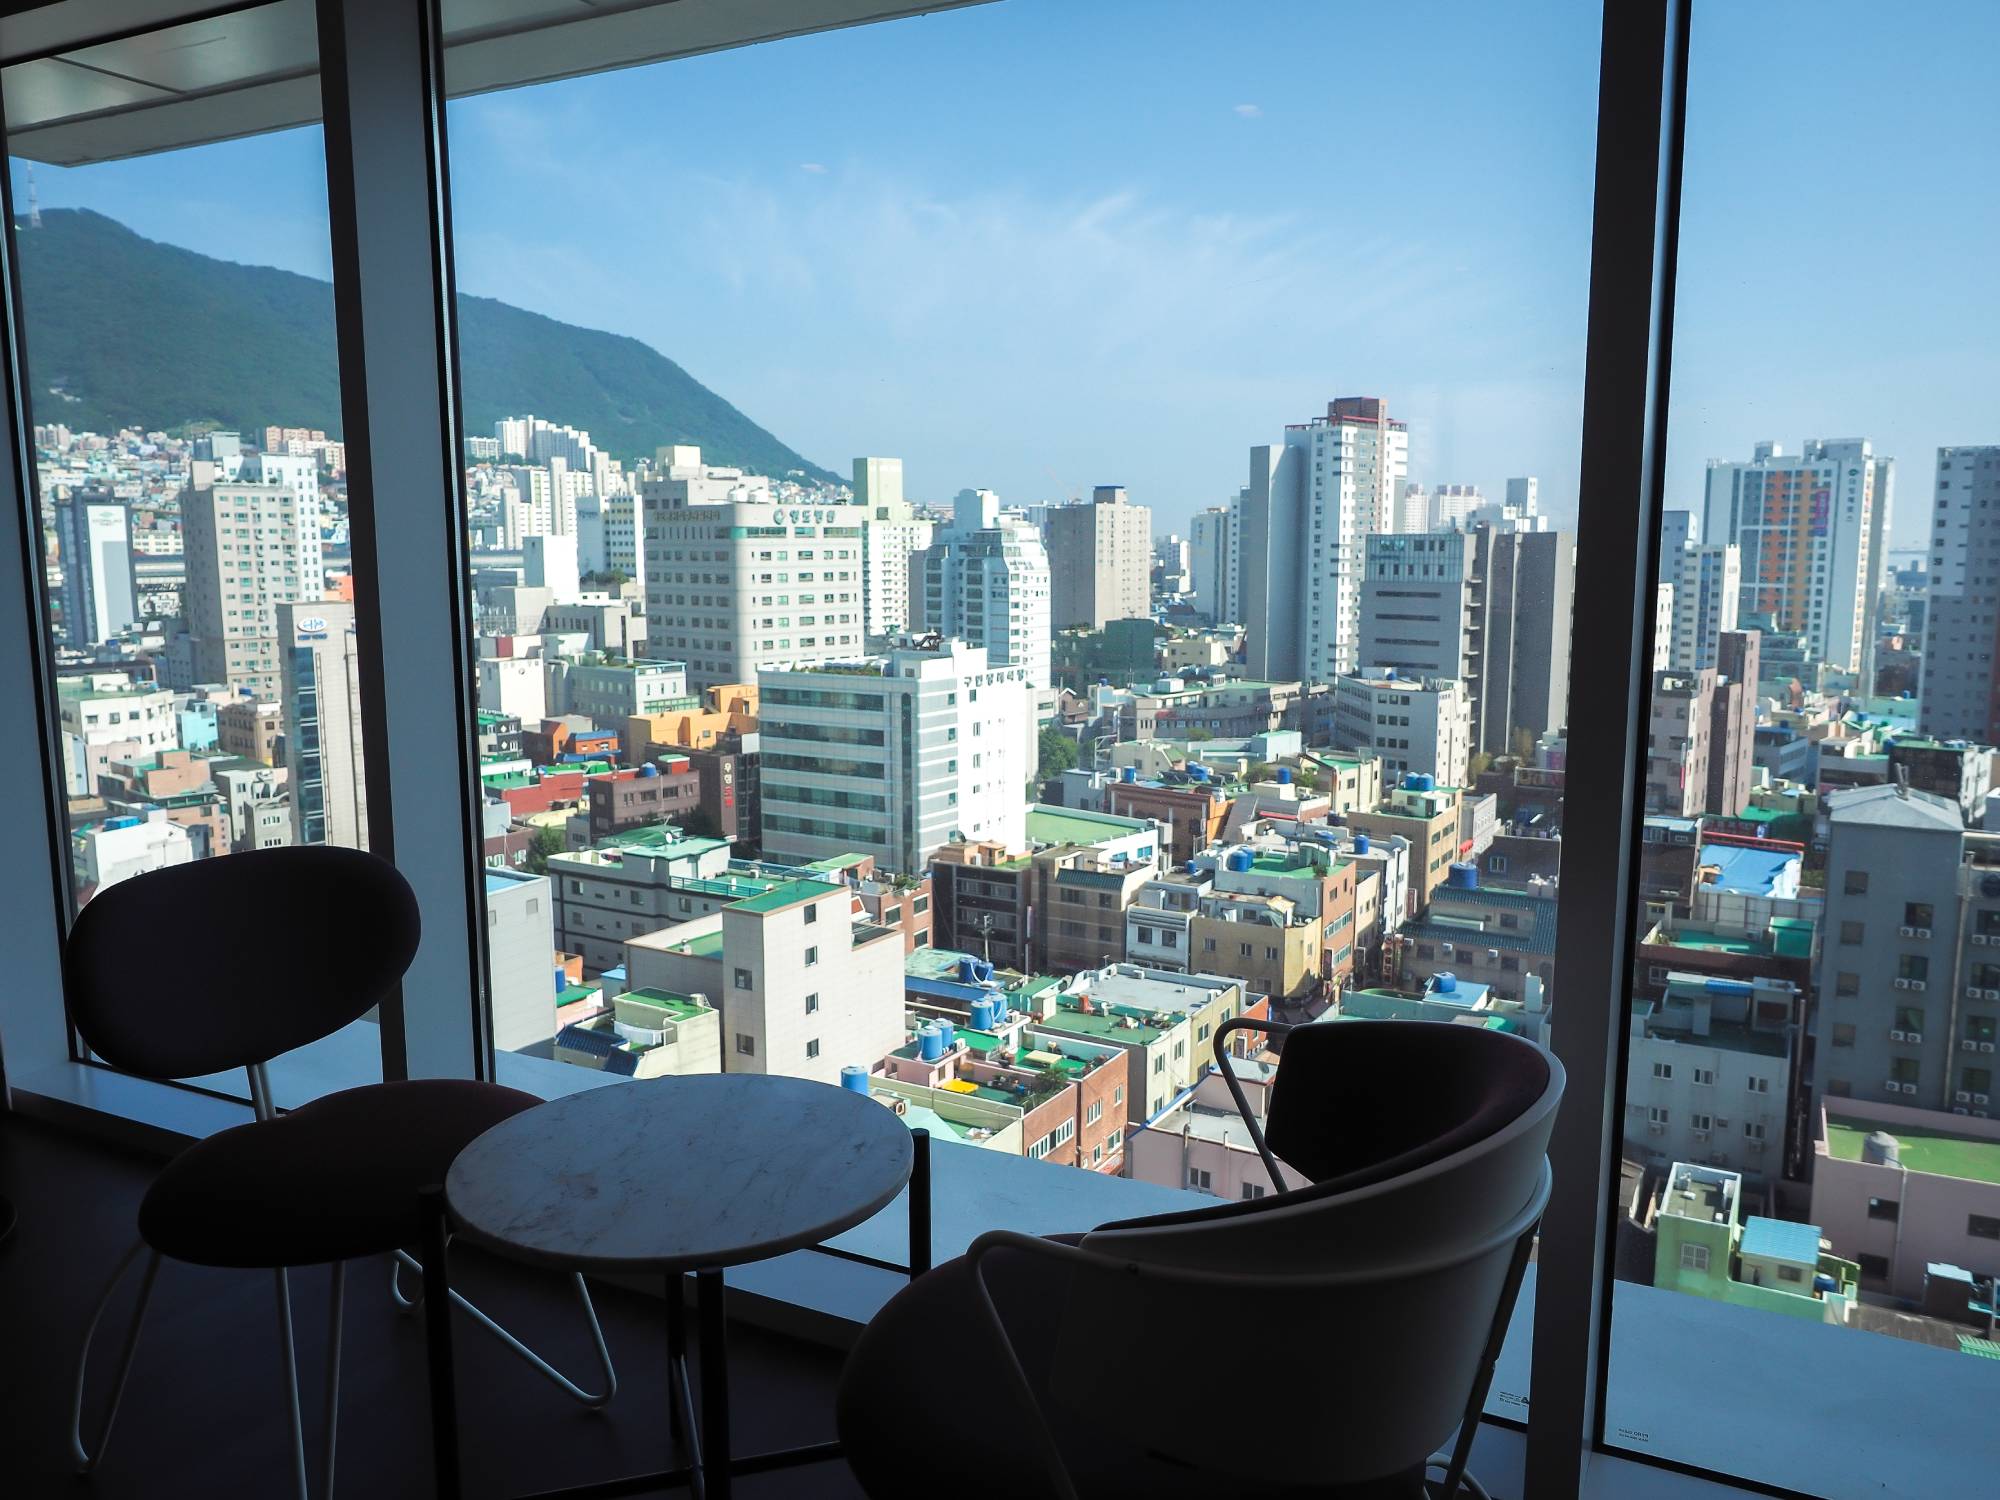 View of the buildings of Yeongdo Island and Bongnaesan Mountain, with the ocean in the background, from my room.